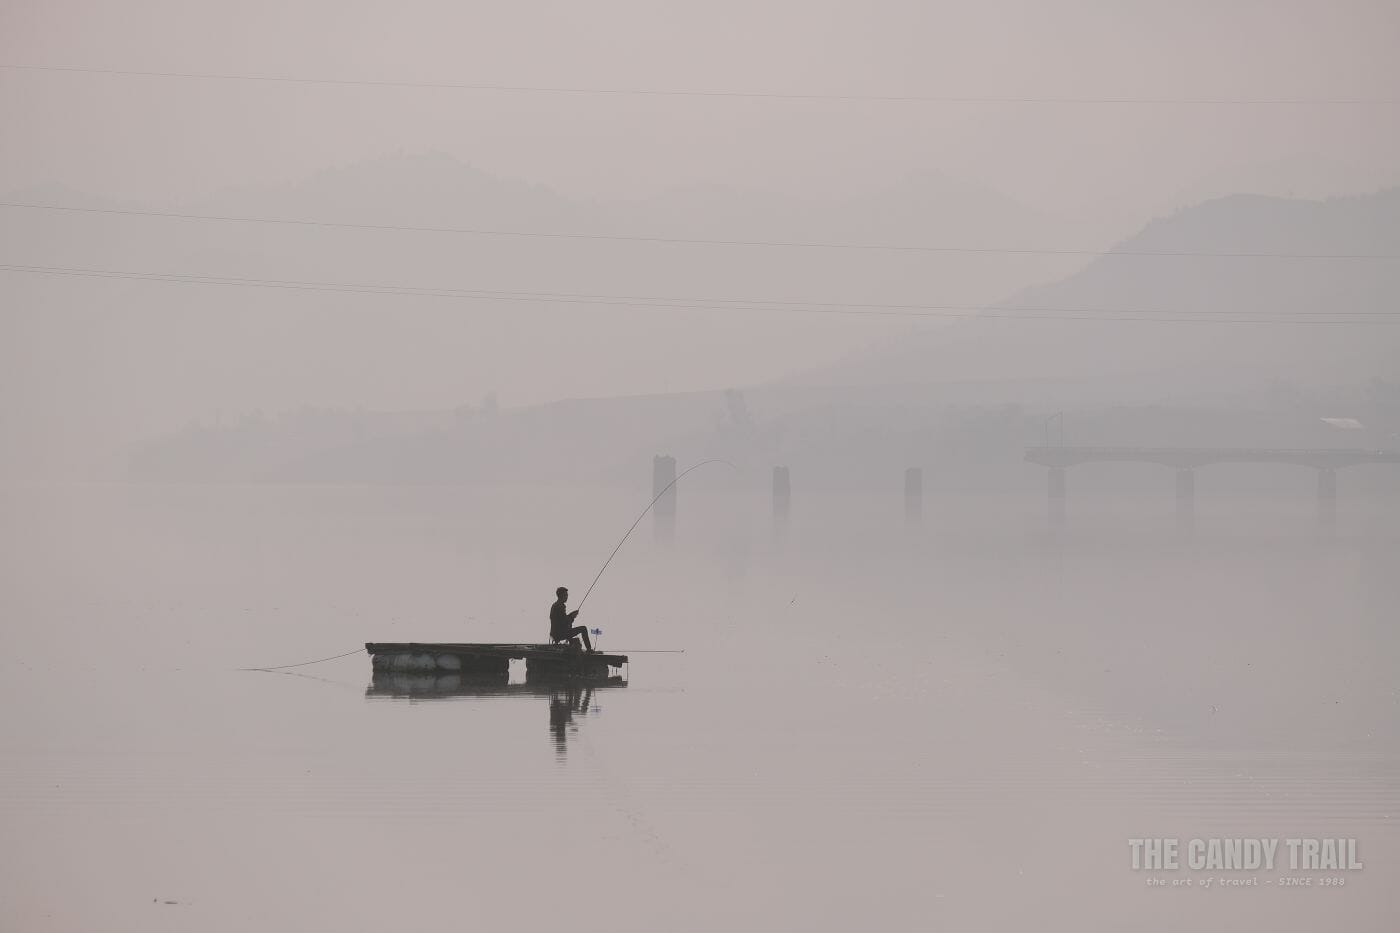 Yalu River Fishing On Chinese Side Looking To Blown Up Japanese Ww2 Bridge Over To Dprk